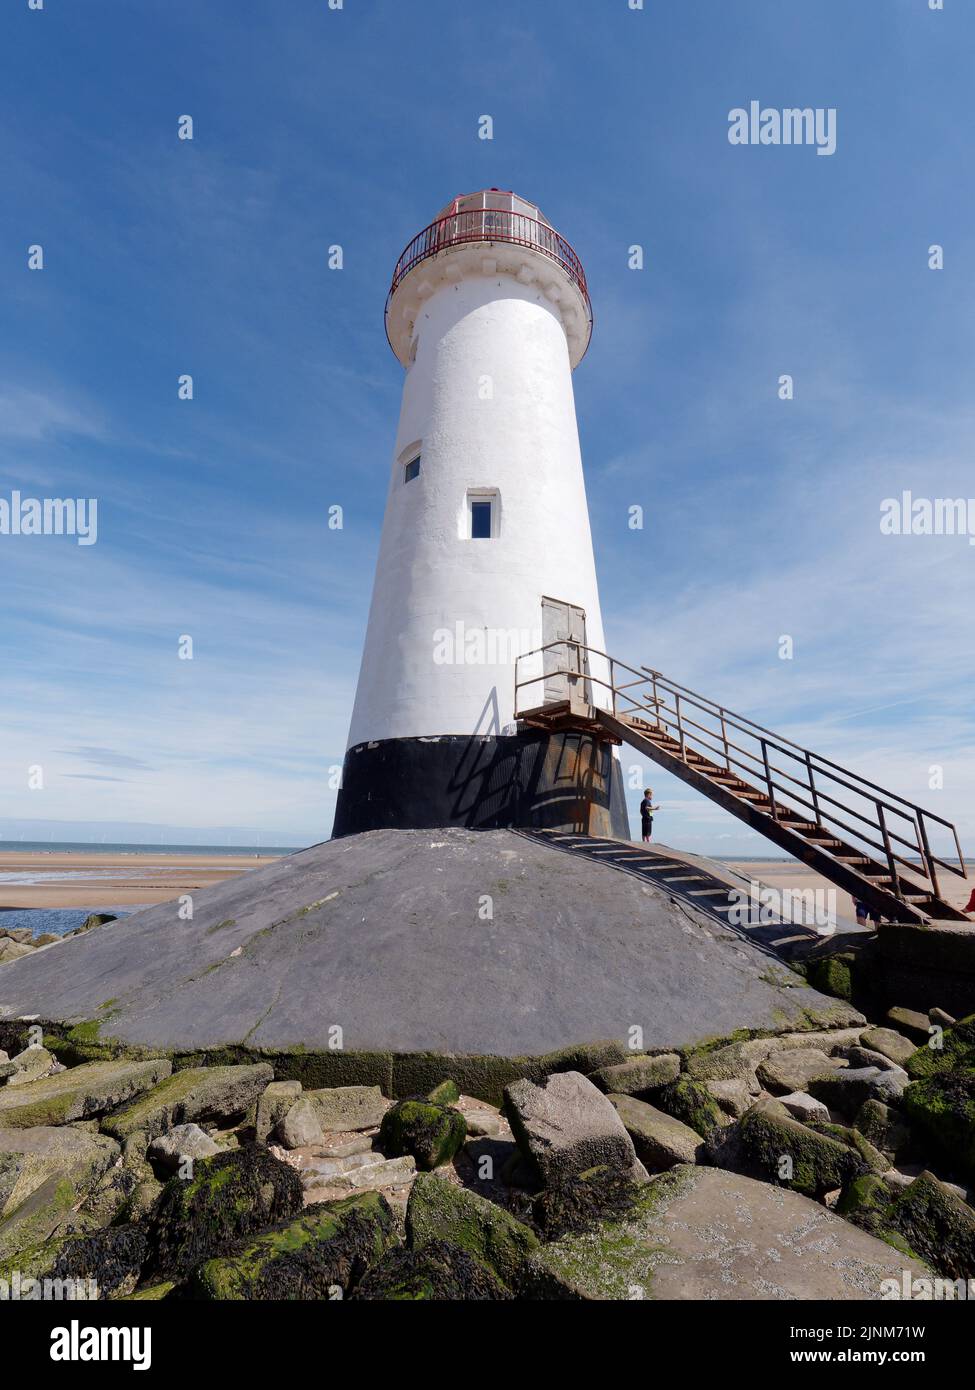 Talacre, Flintshire, Wales, Aug 07 2022: Point of Ayr Lighthouse aka Talacre Lighthouse, a Grade II listed building situated on the beach. Stock Photo